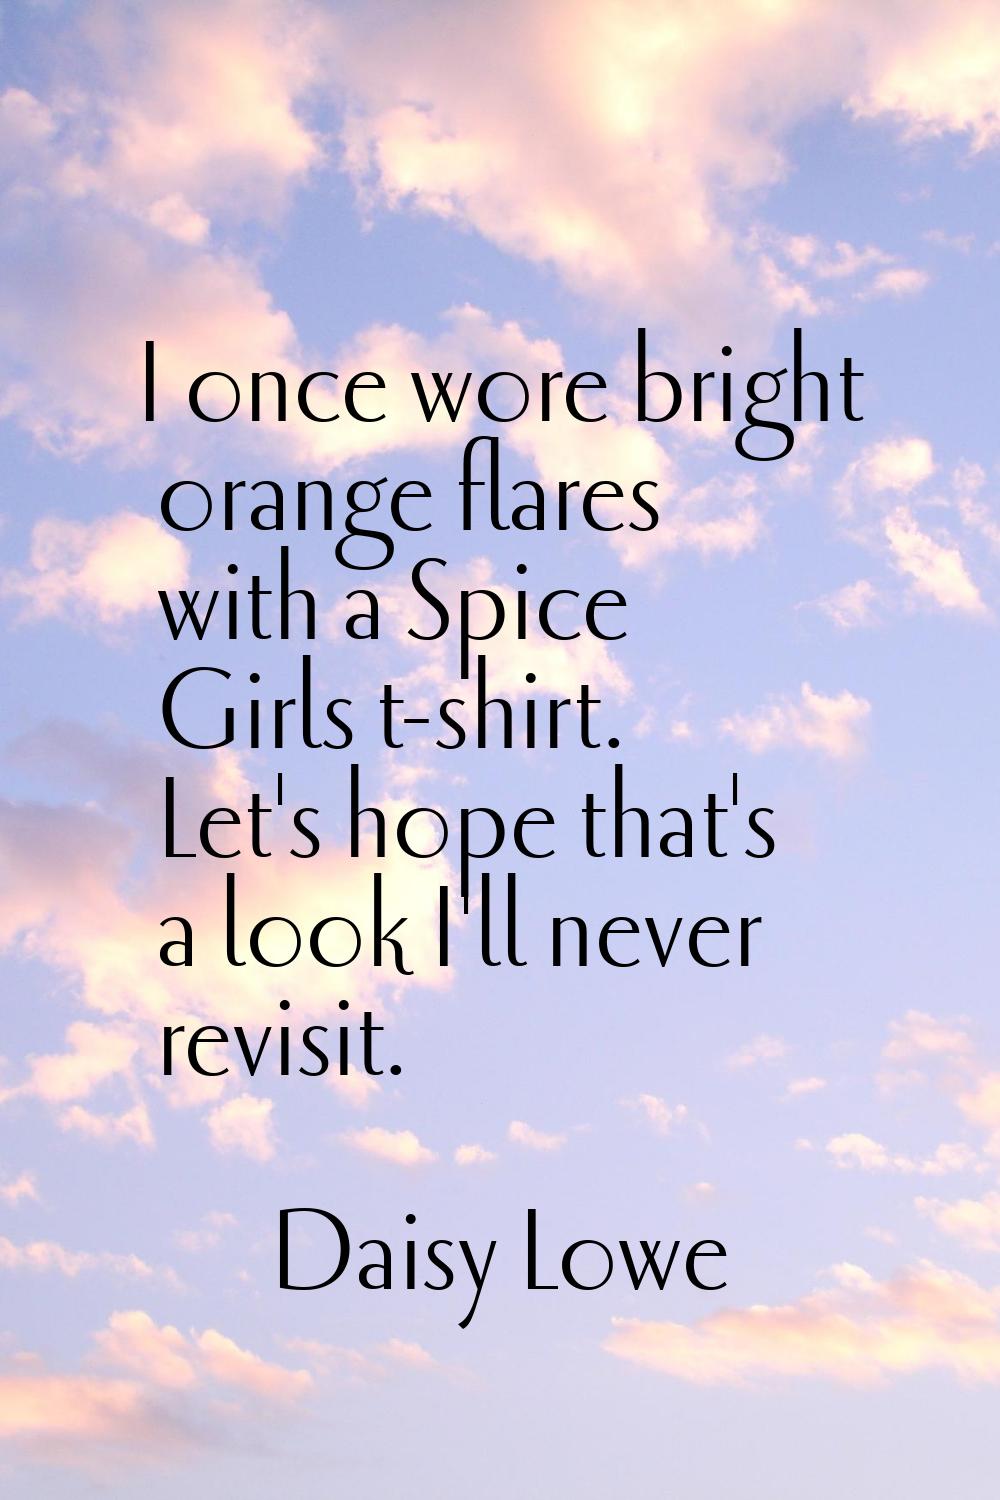 I once wore bright orange flares with a Spice Girls t-shirt. Let's hope that's a look I'll never re